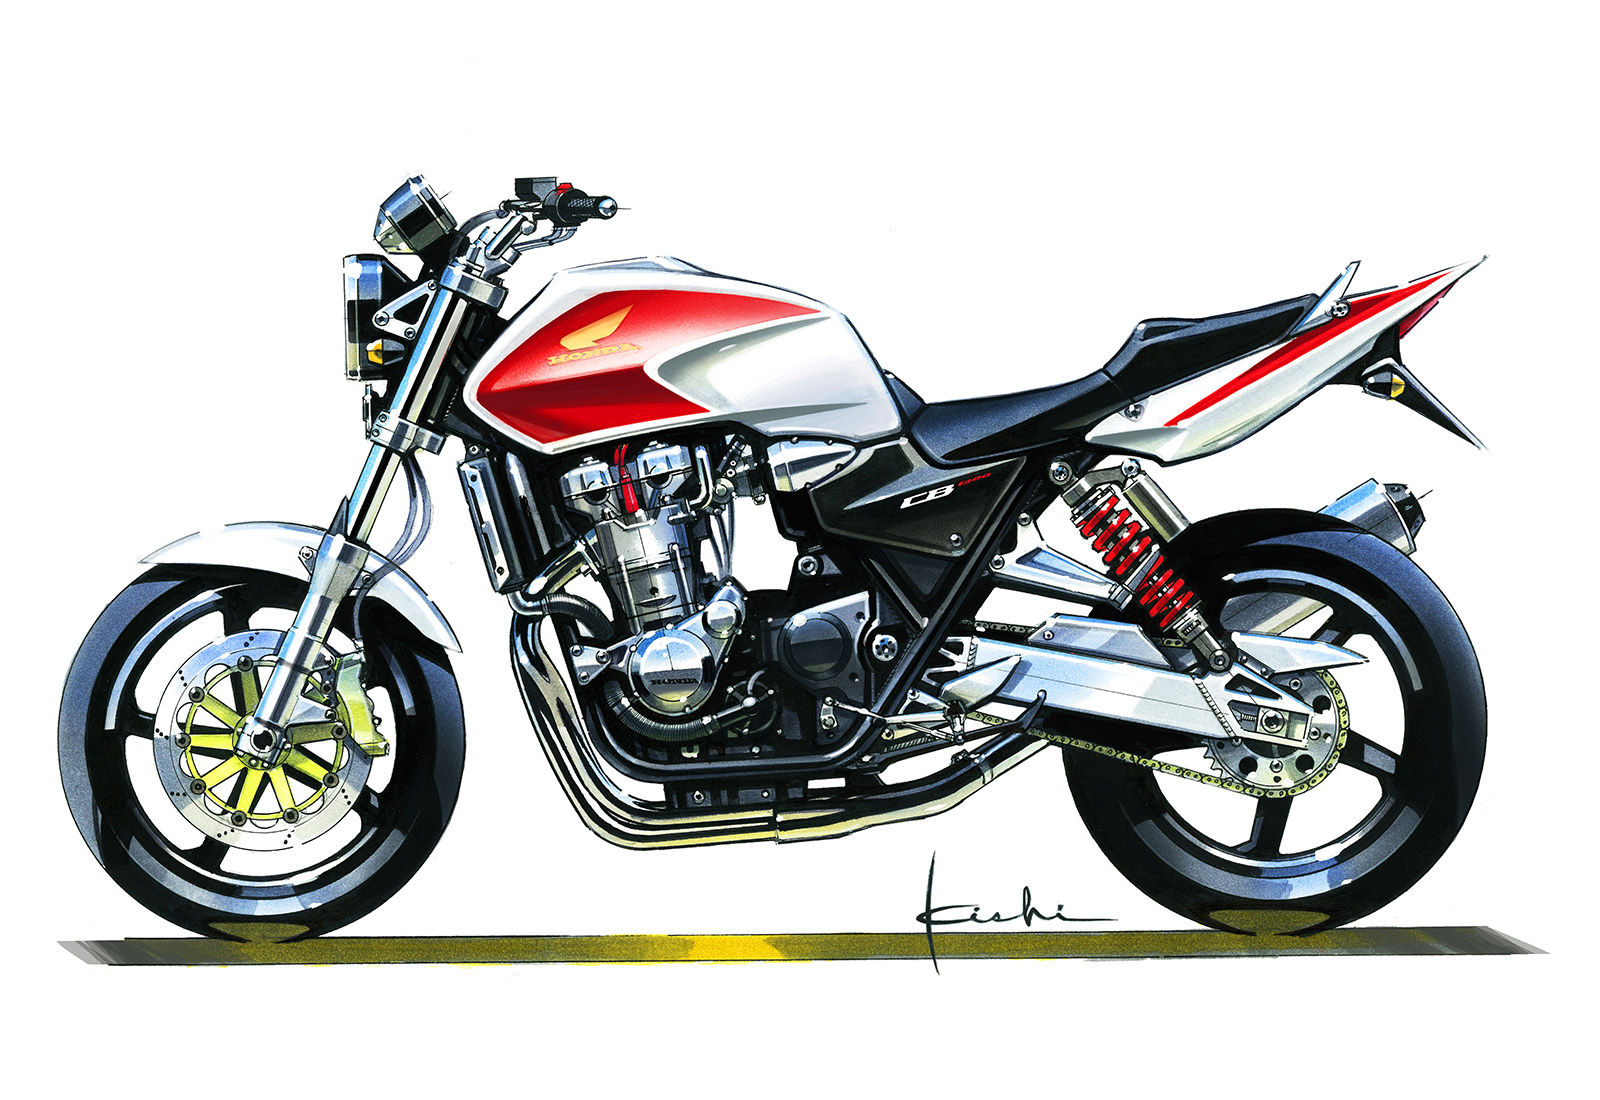 CB1300 SUPER FOUR（2003年）ファイナルスケッチ